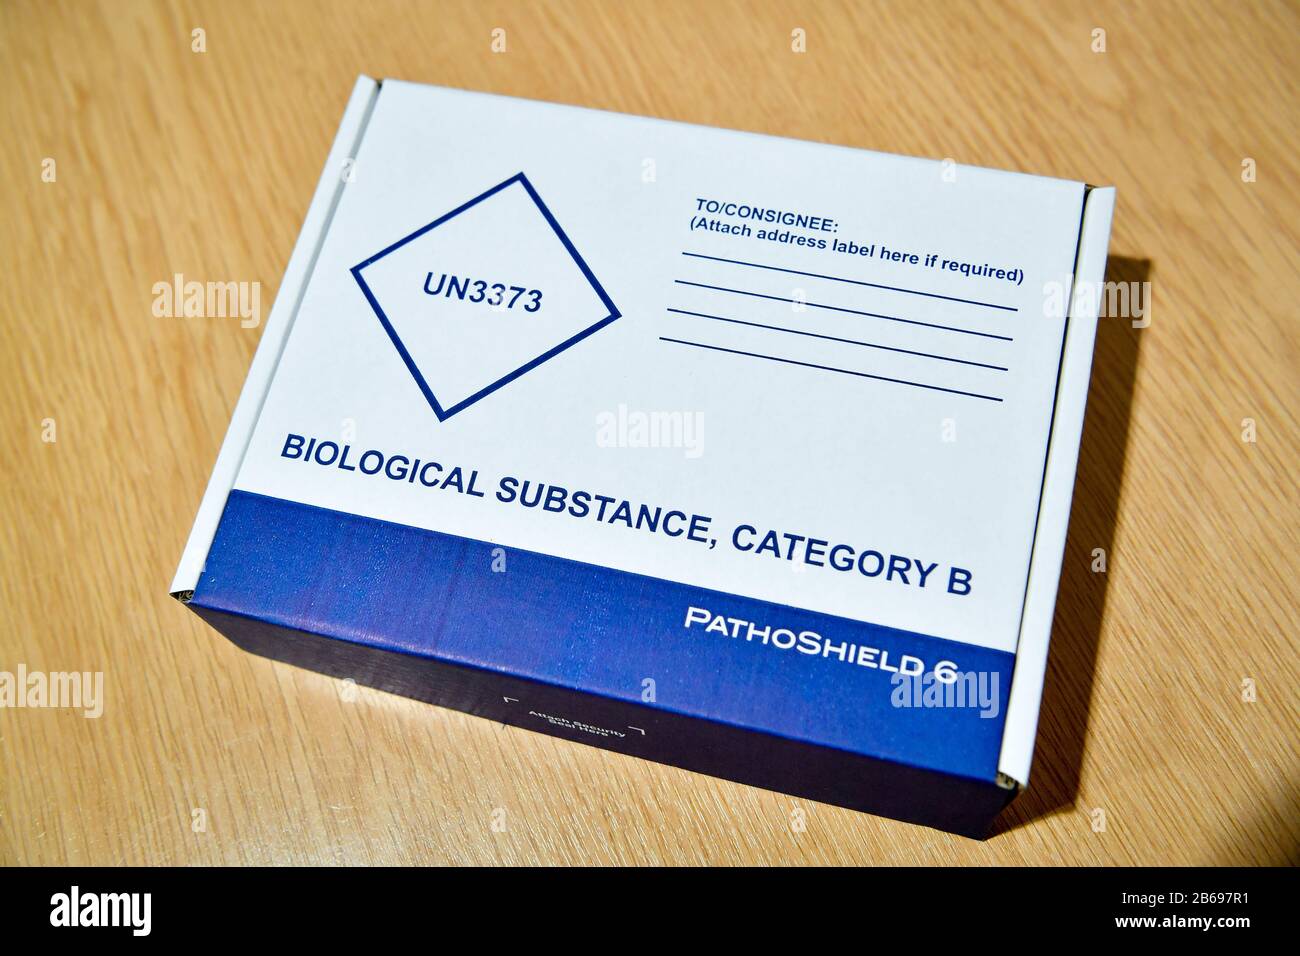 The top view of a coronavirus (COVID-19) testing kit, containing sterile swabs, which have been put together by Public Health Wales and will be posted out to patients for remote testing. Stock Photo